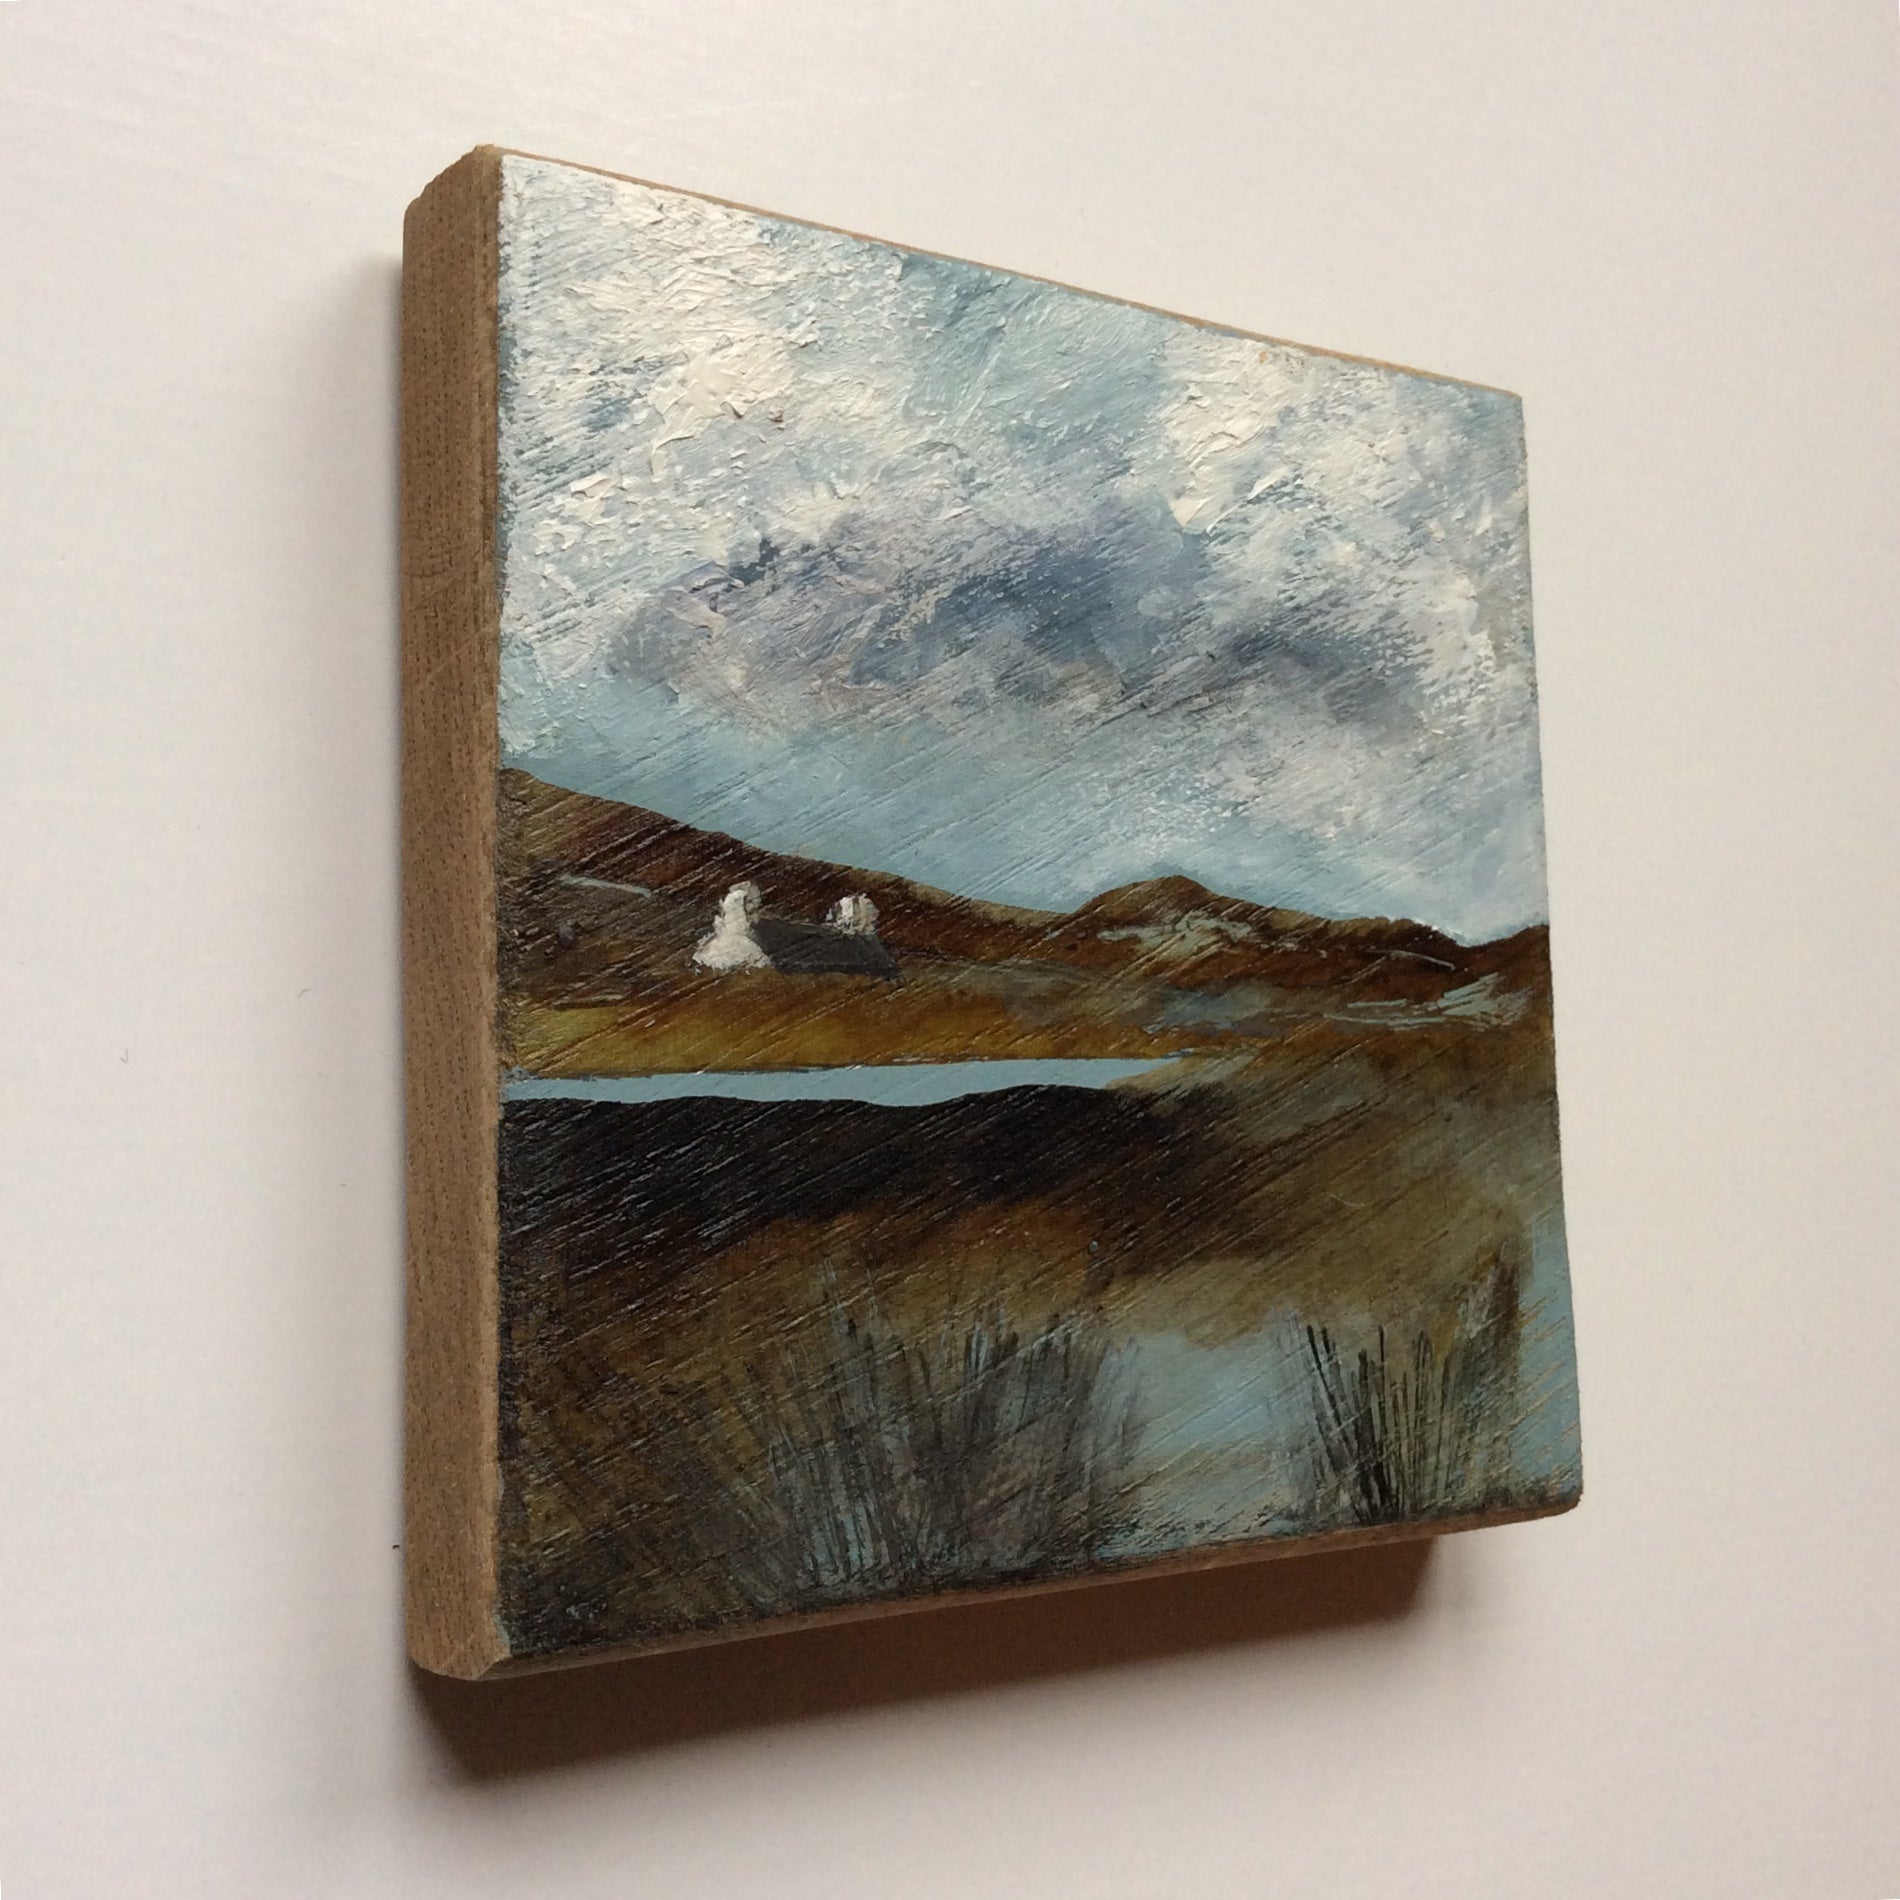 Mini Mixed Media Art on wood By Louise O'Hara - "Storm over the Tarn"